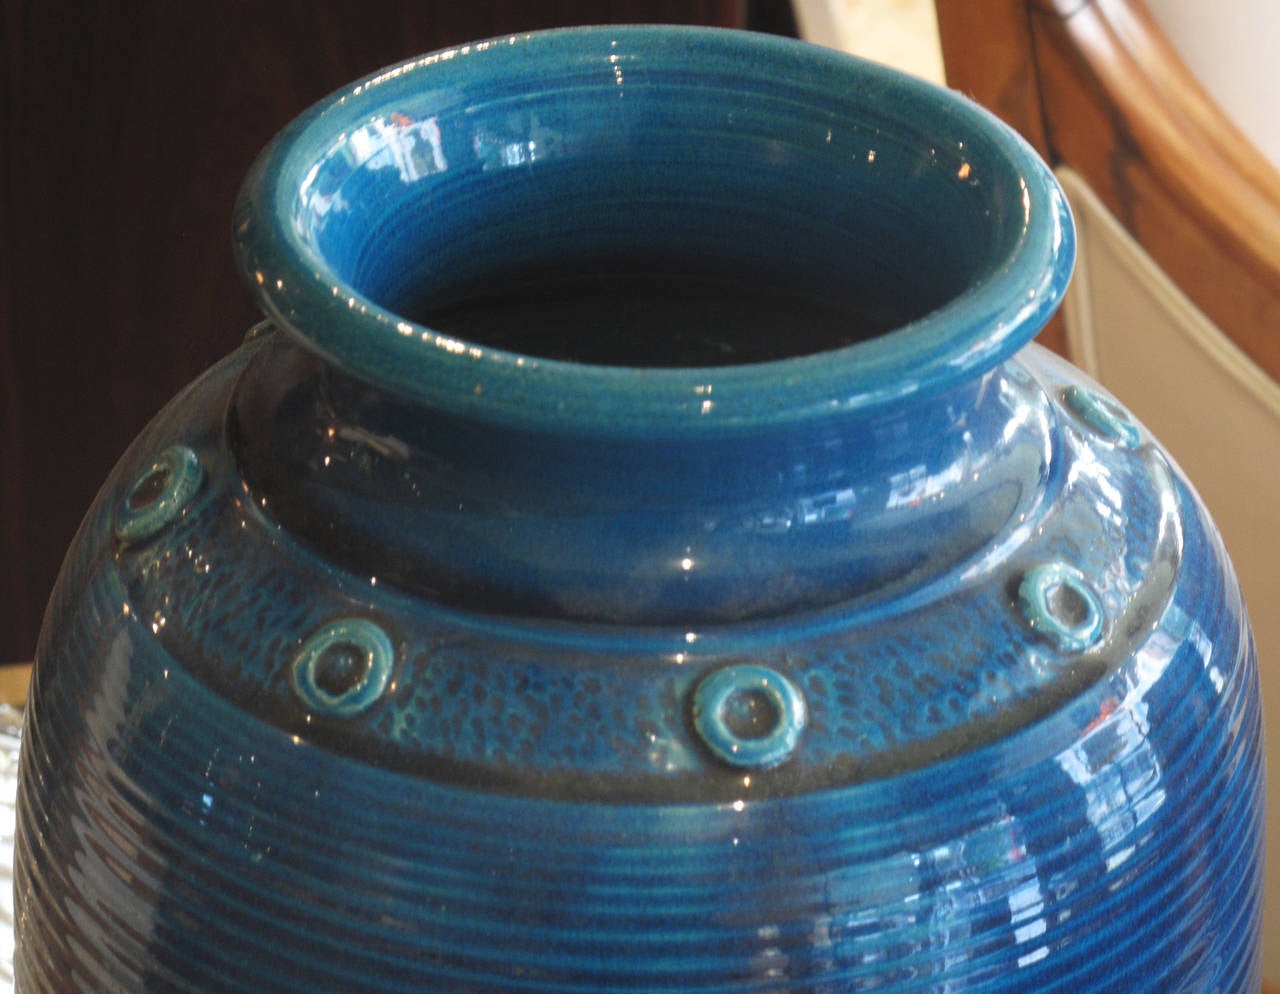 Large blue glazed (I would say close to a cobalt blue) ceramic vase. The body with ribbed and applied decoration. By the Kähler ceramic factory which was located in Naestved, Denmark. The vase, circa 1940s.